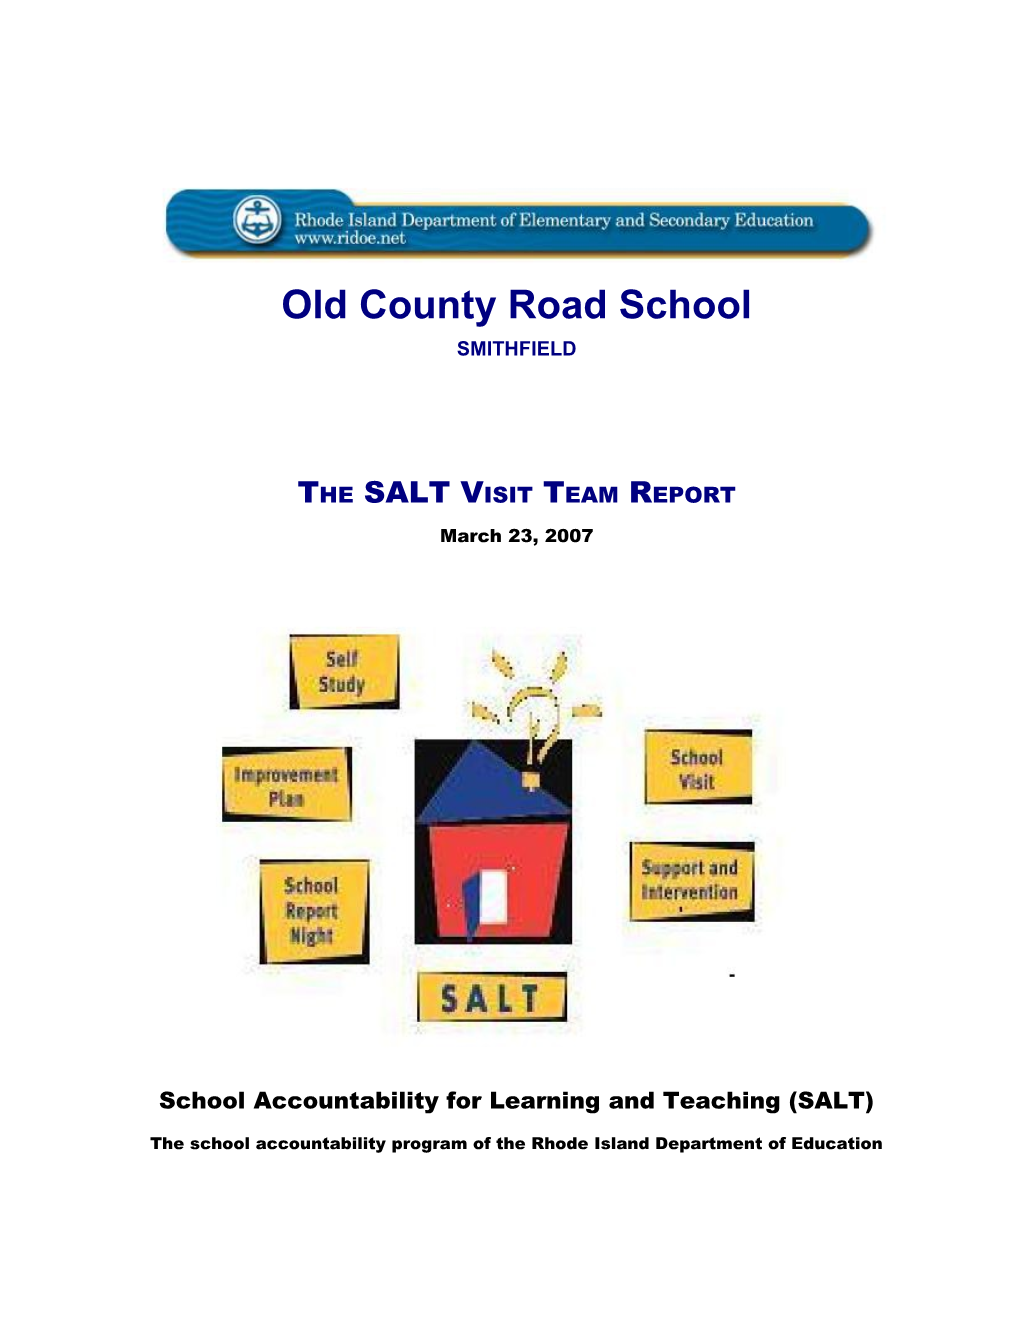 School Accountability for Learning and Teaching (SALT) s2